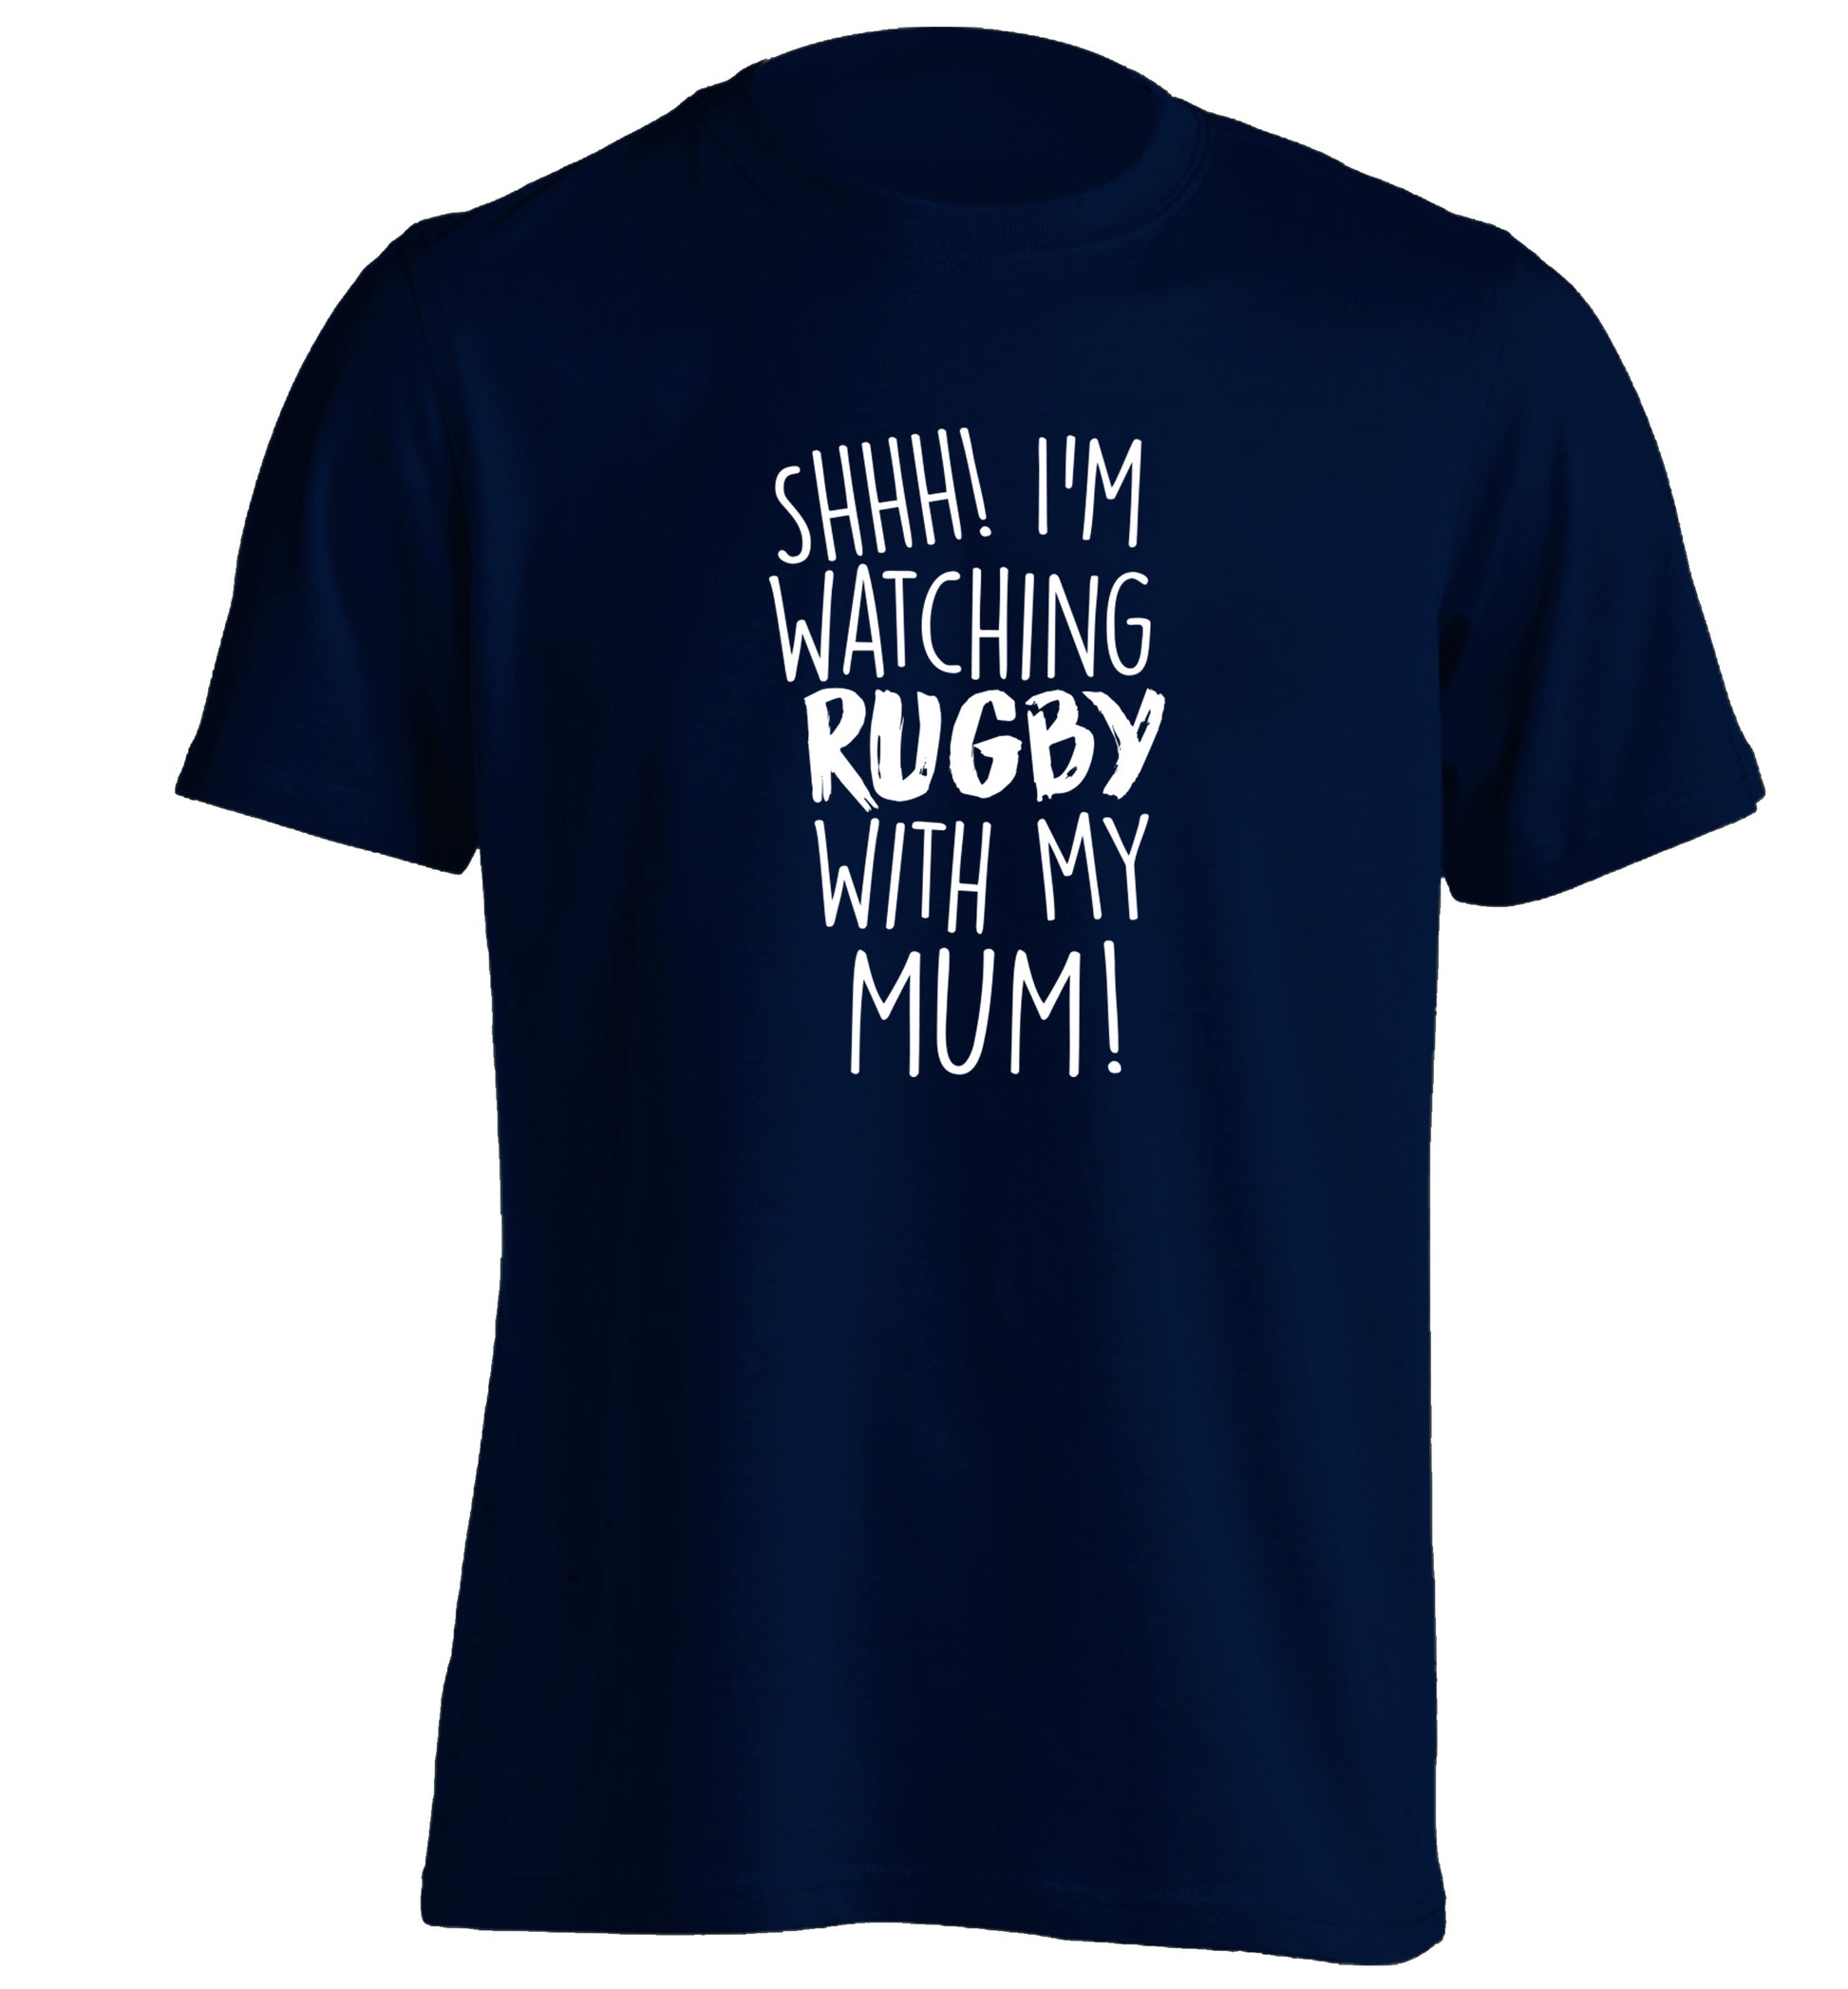 Shh... I'm watching rugby with my mum adults unisex navy Tshirt 2XL